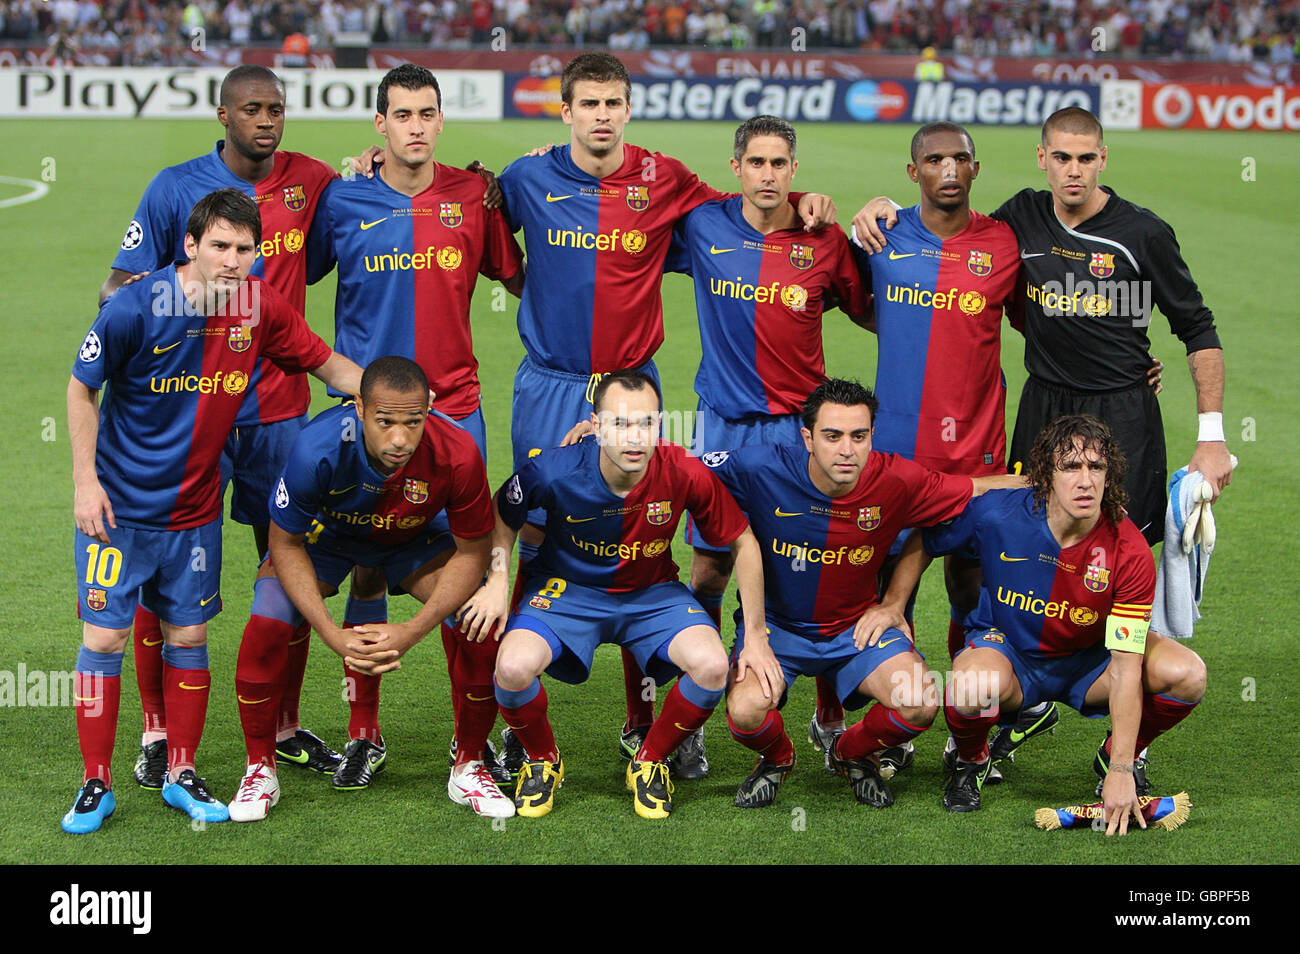 Football - Ligue des Champions - Final - Barcelone v Manchester United -  Stade olympique Photo Stock - Alamy